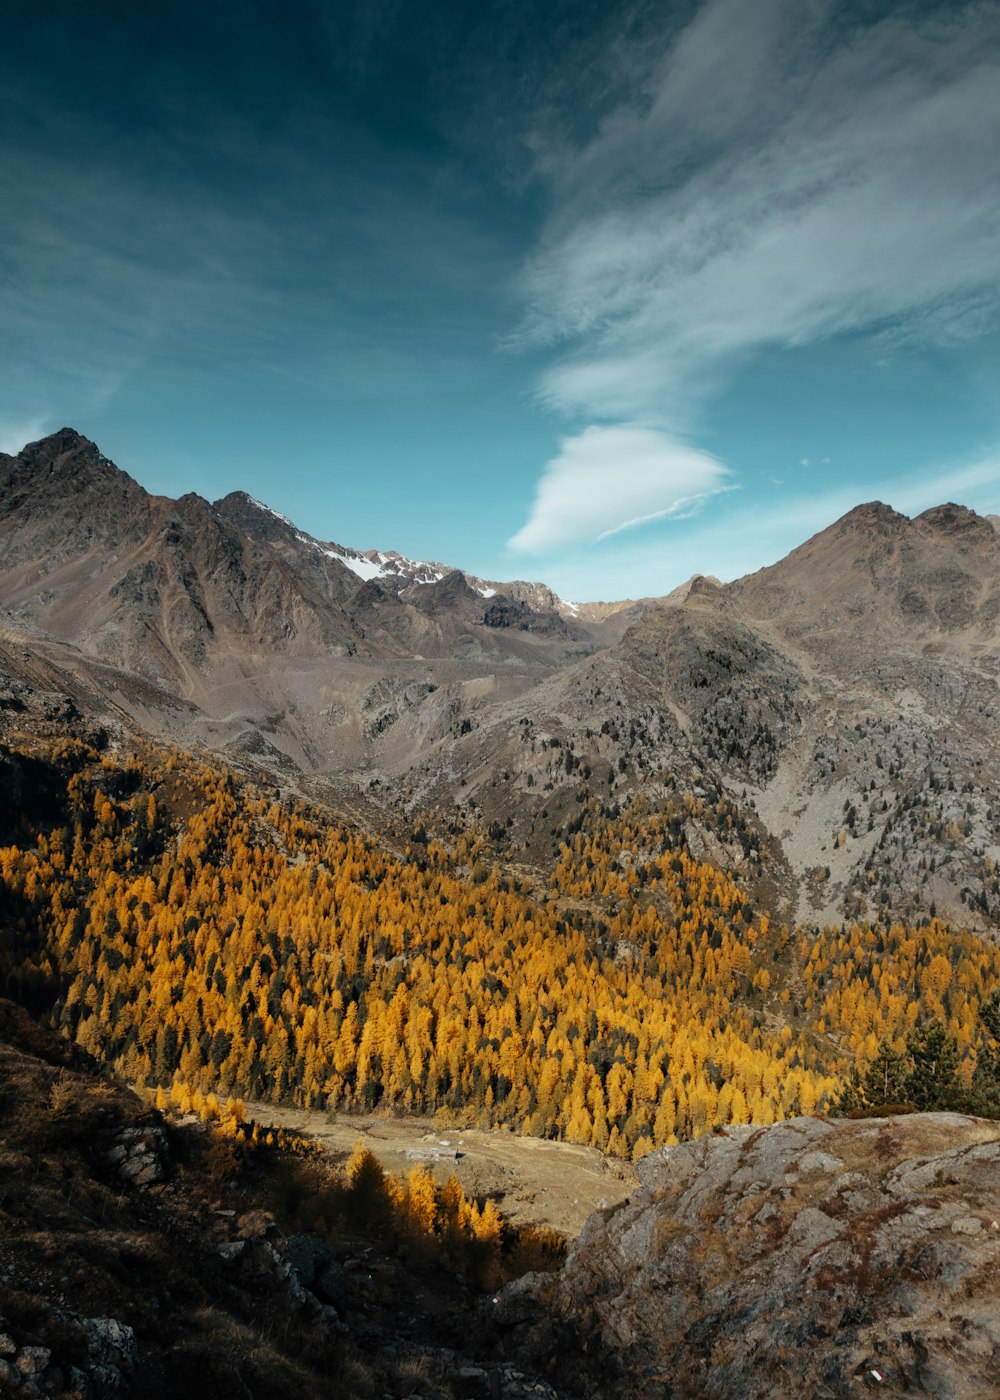 trees surrounded by mountains